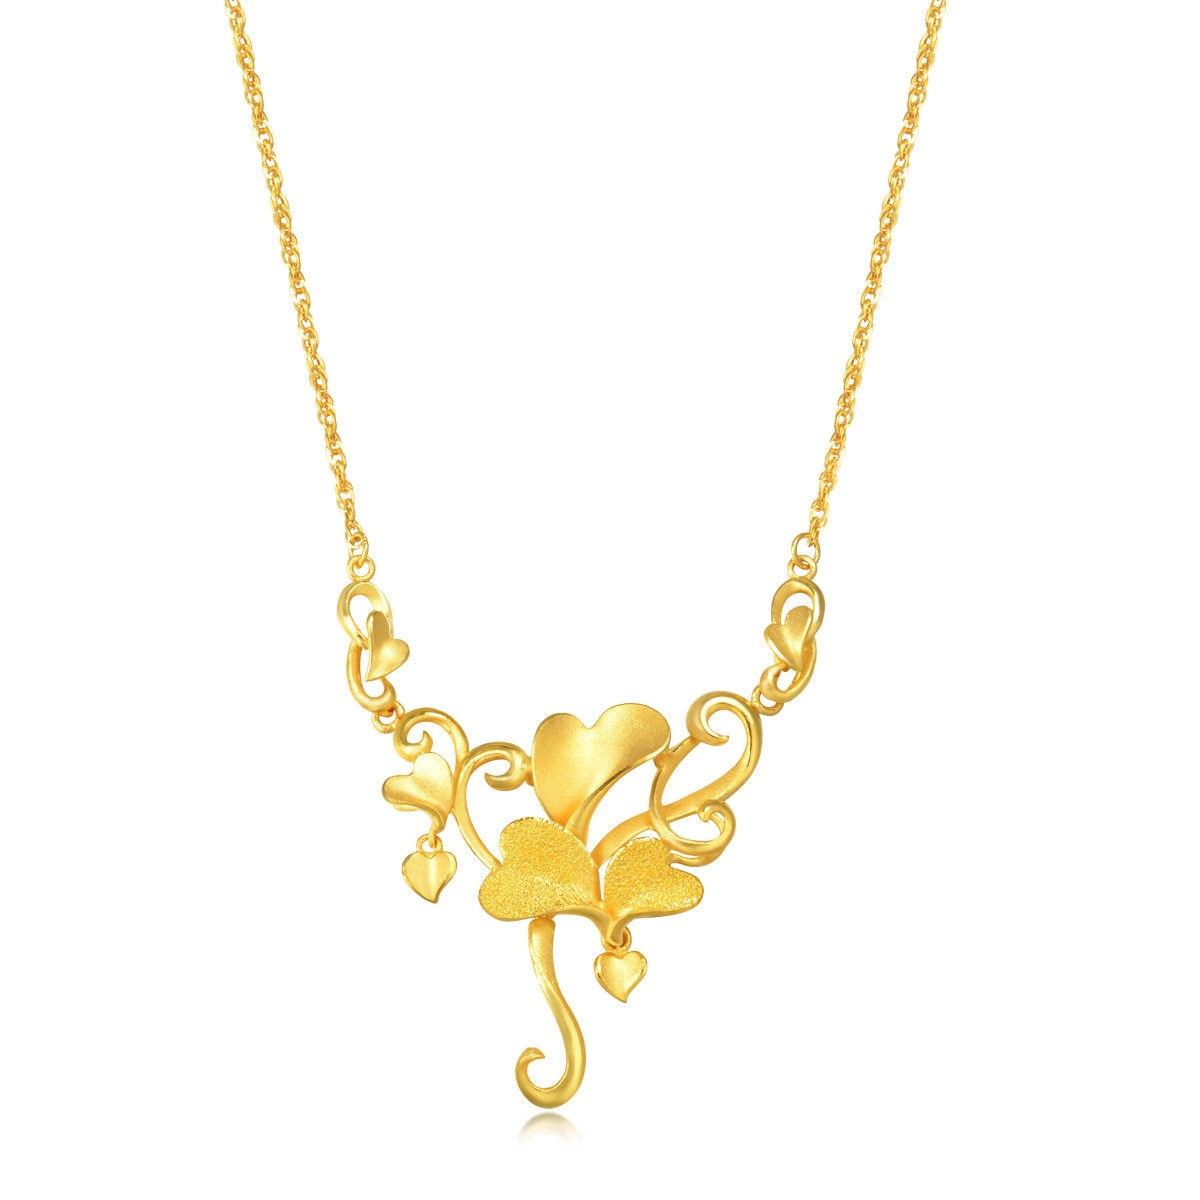 999.9 Gold Necklace(427016-WT-0.3820) | Chow Sang Sang Jewellery